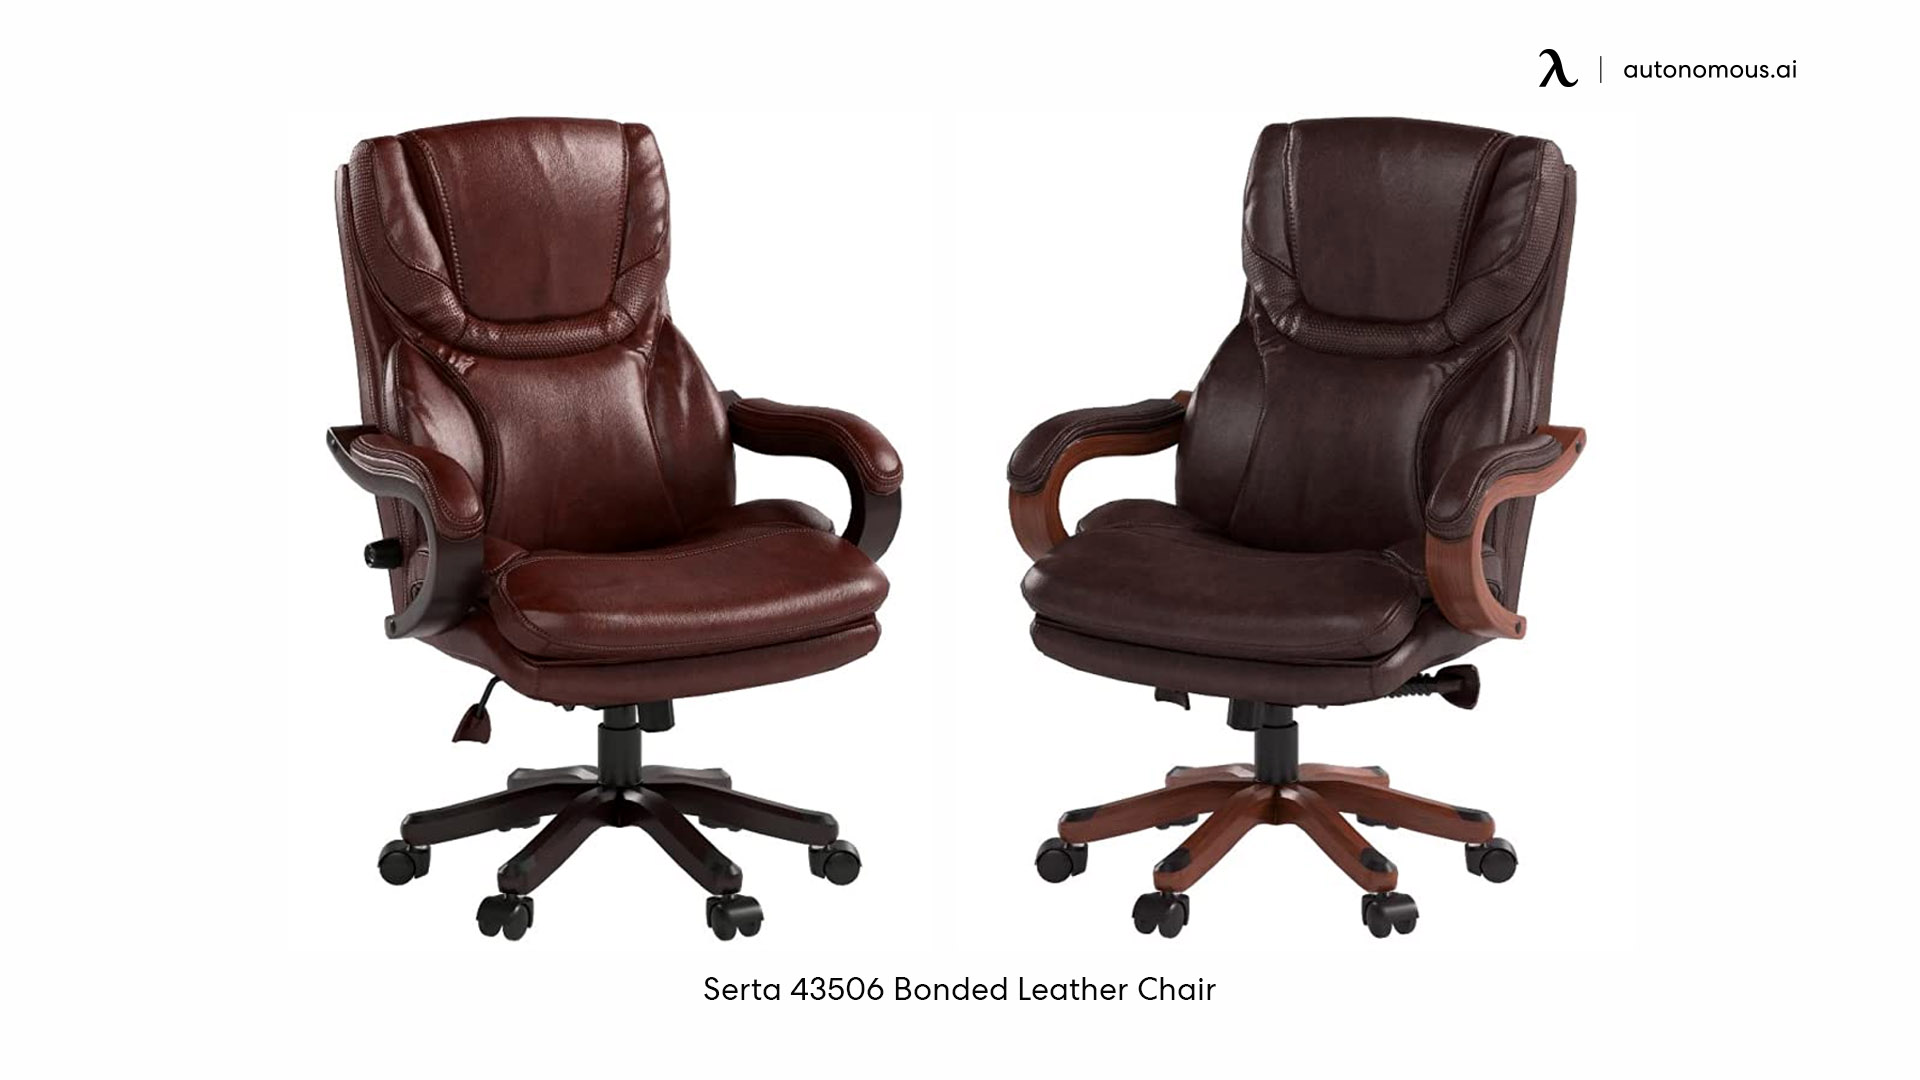 Serta 43506 Bonded affordable office chairs